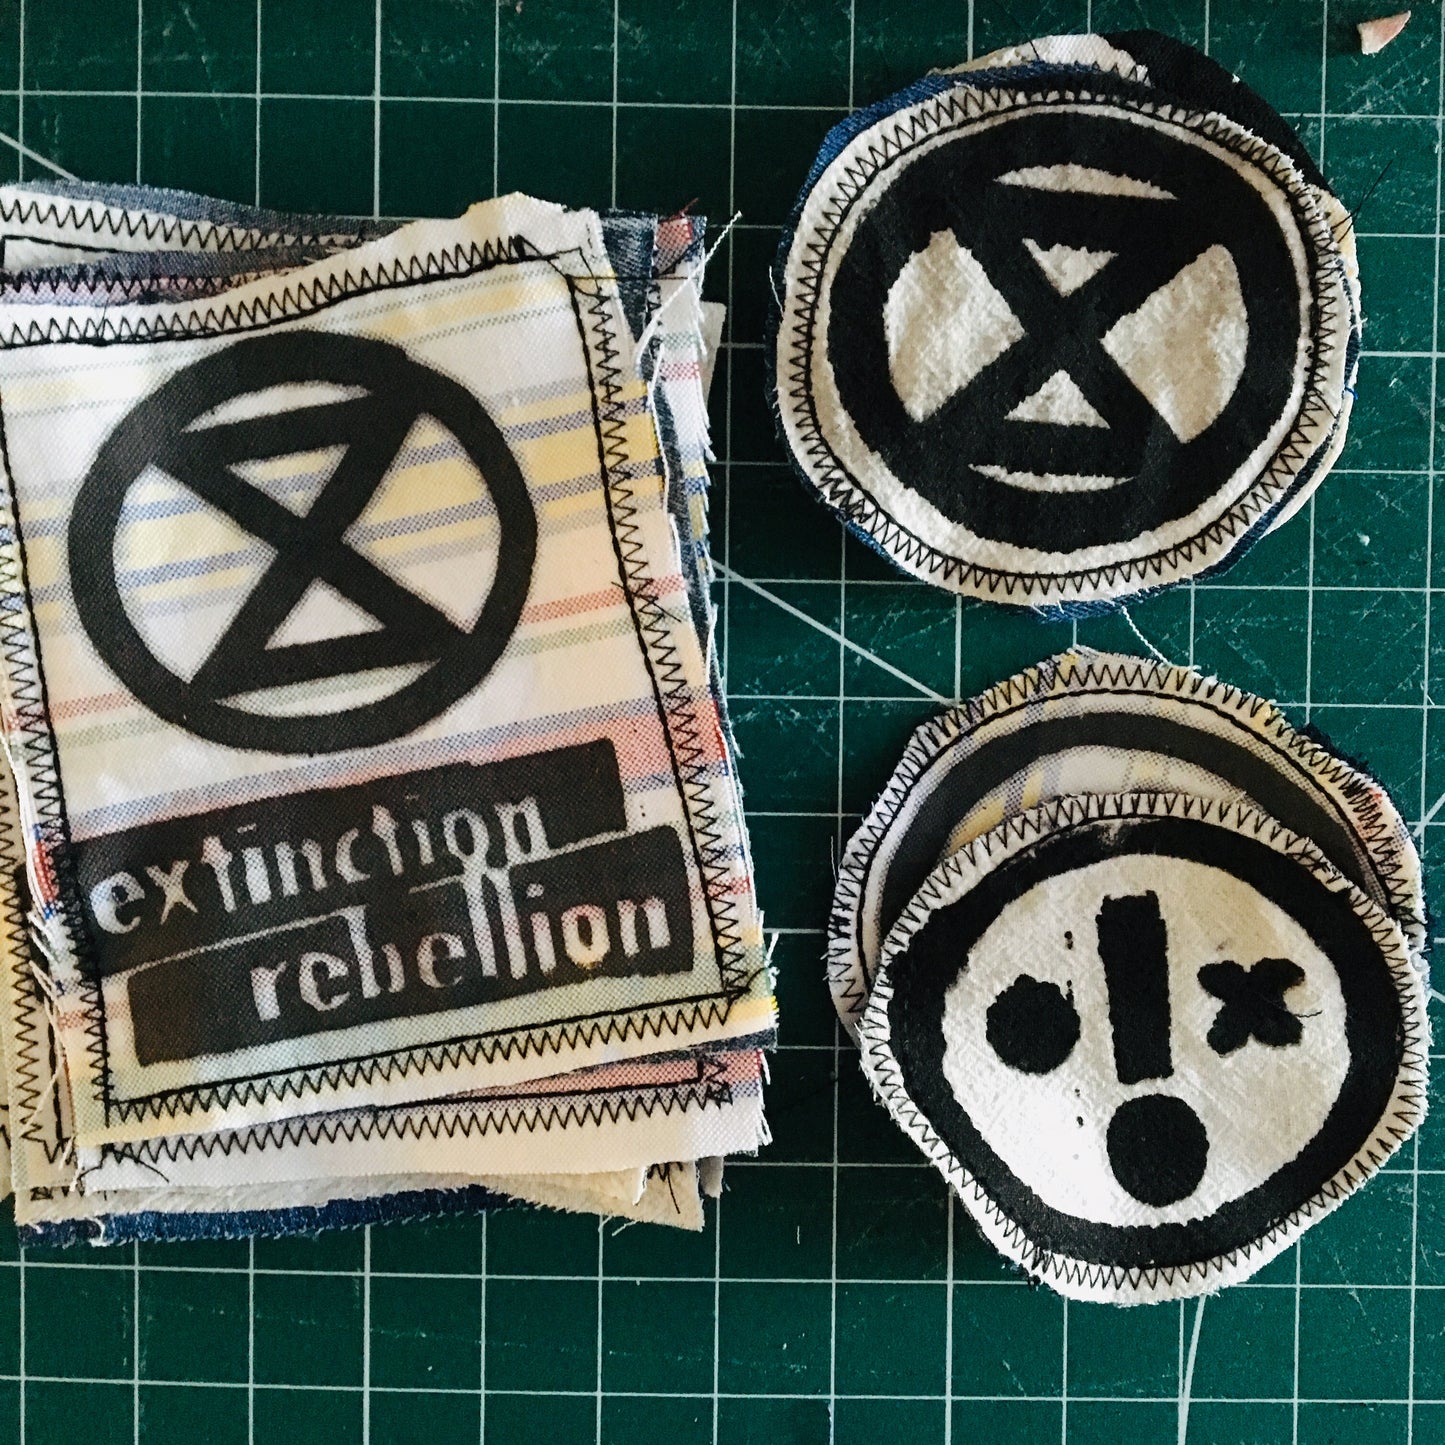 Extinction Rebellion sew on patches